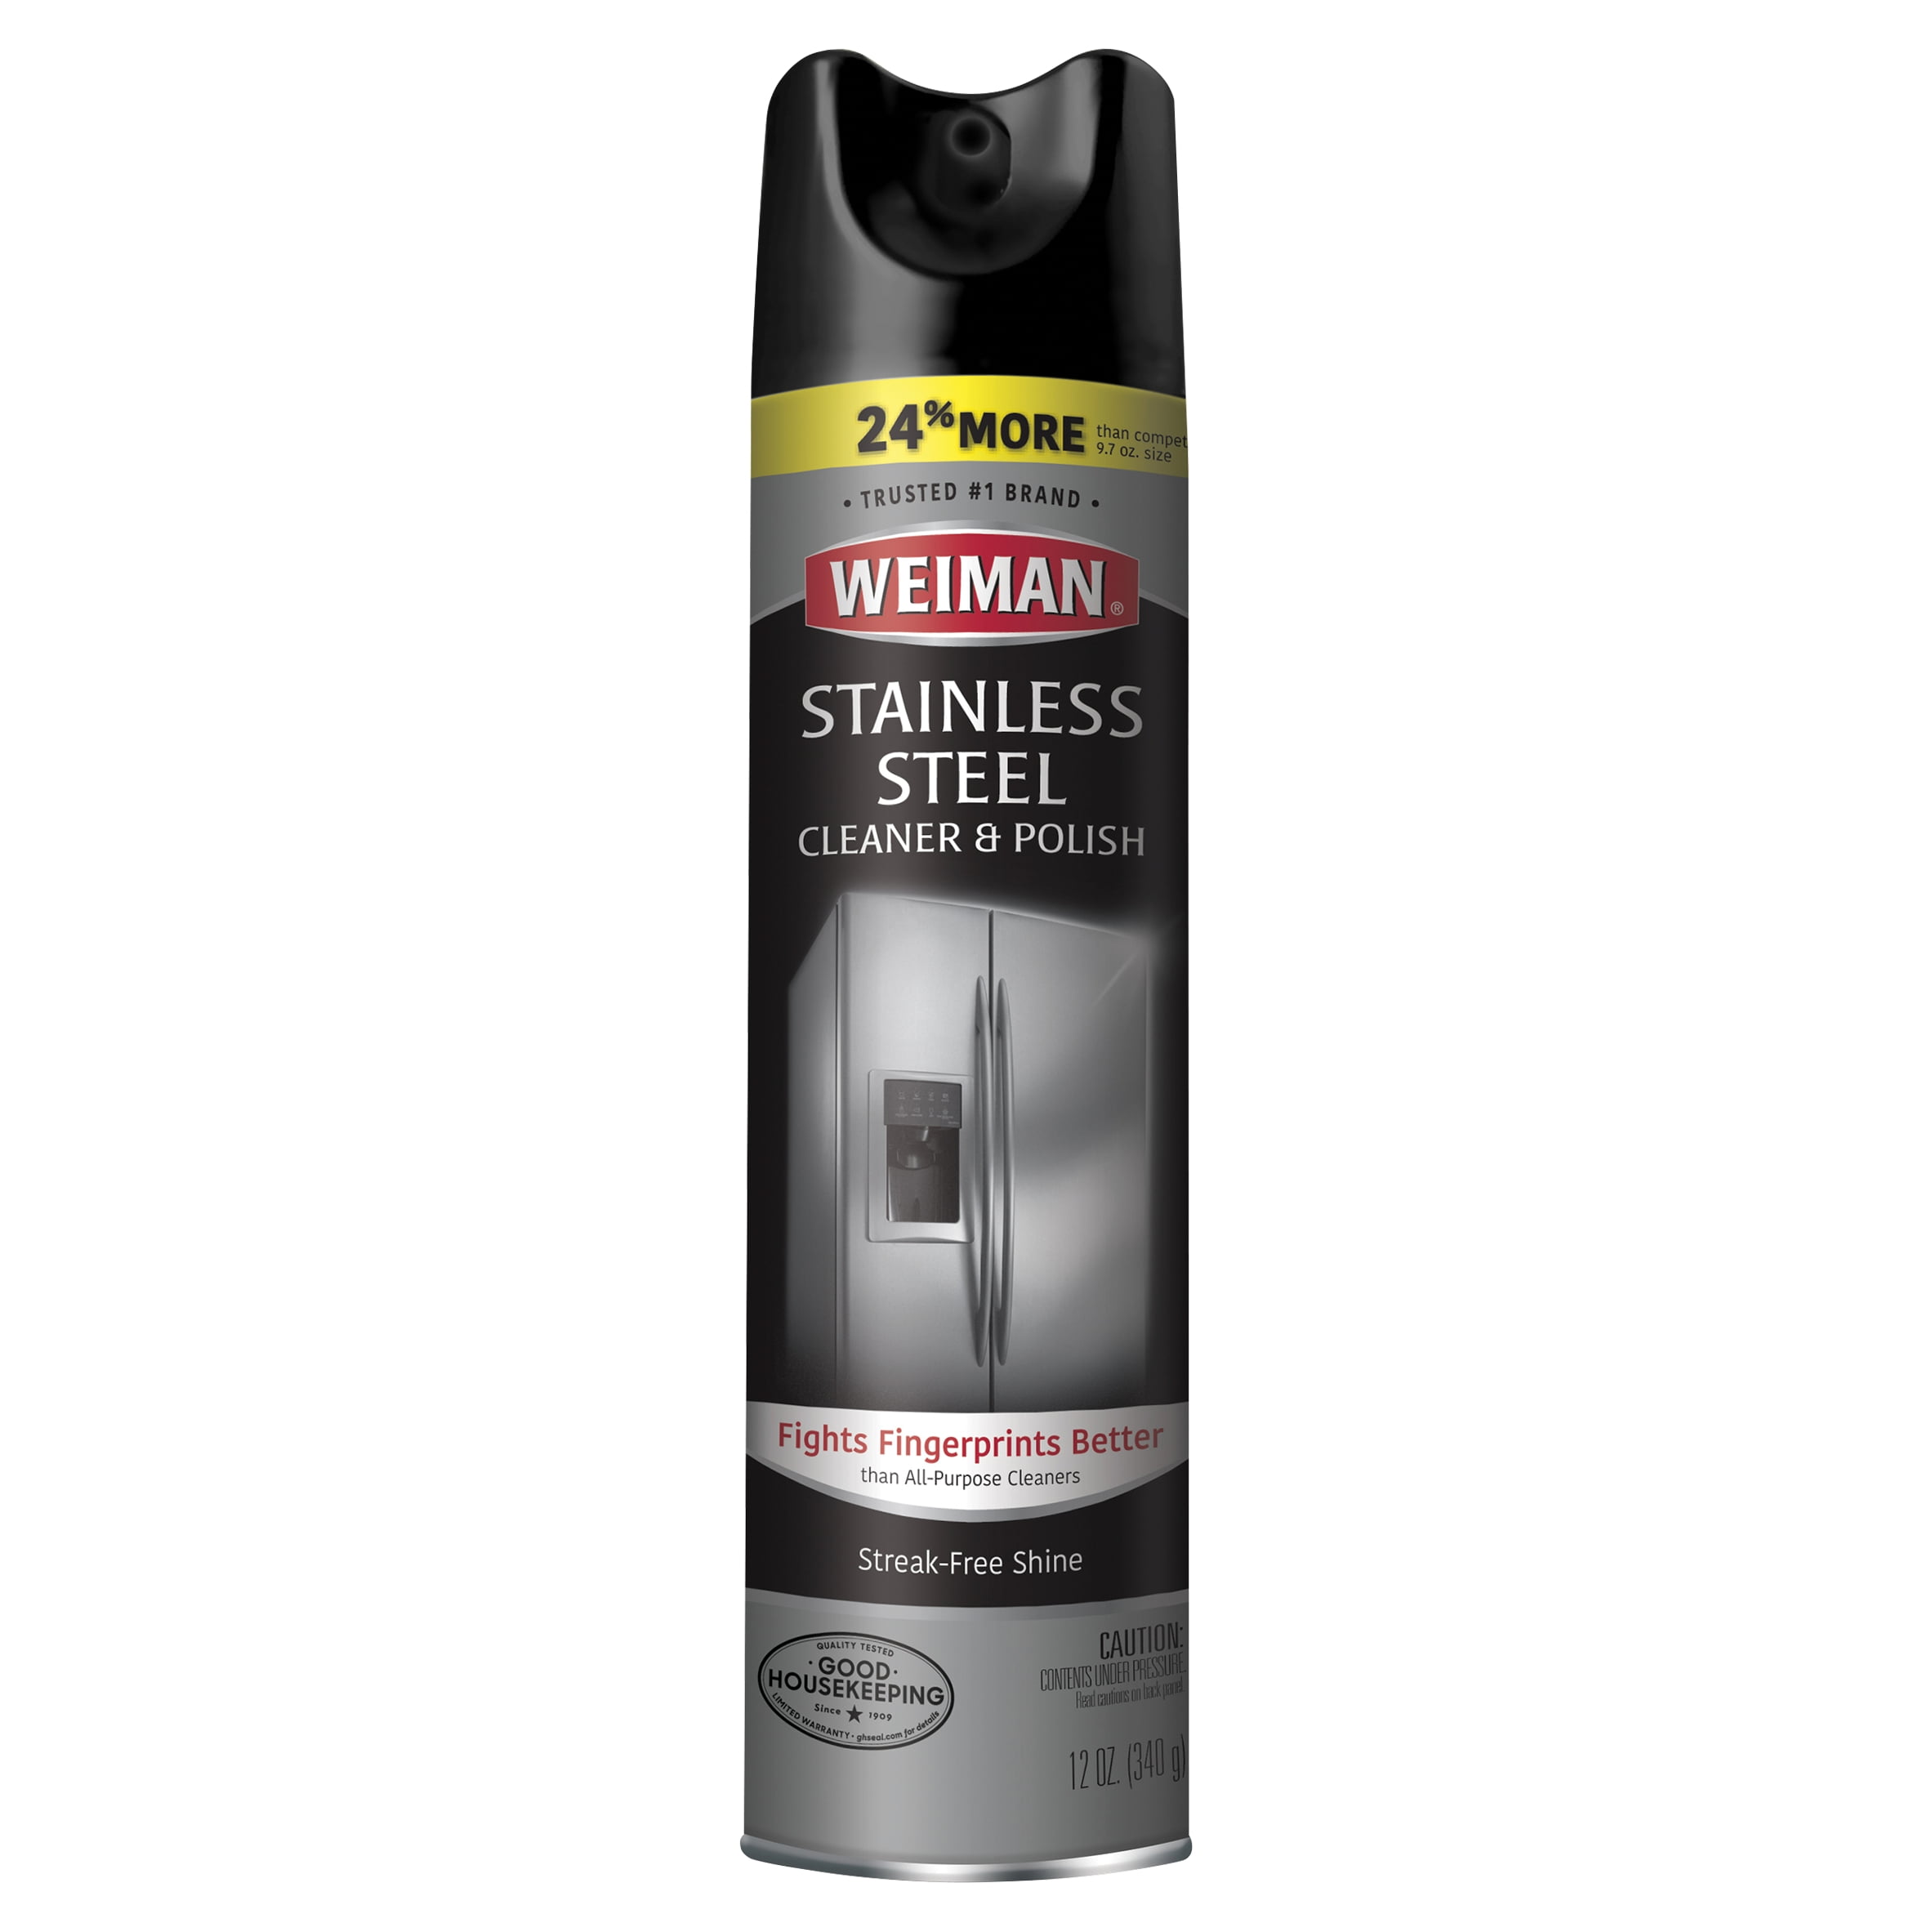 Weiman Stainless Steel Cleaner & Polish, 12 oz